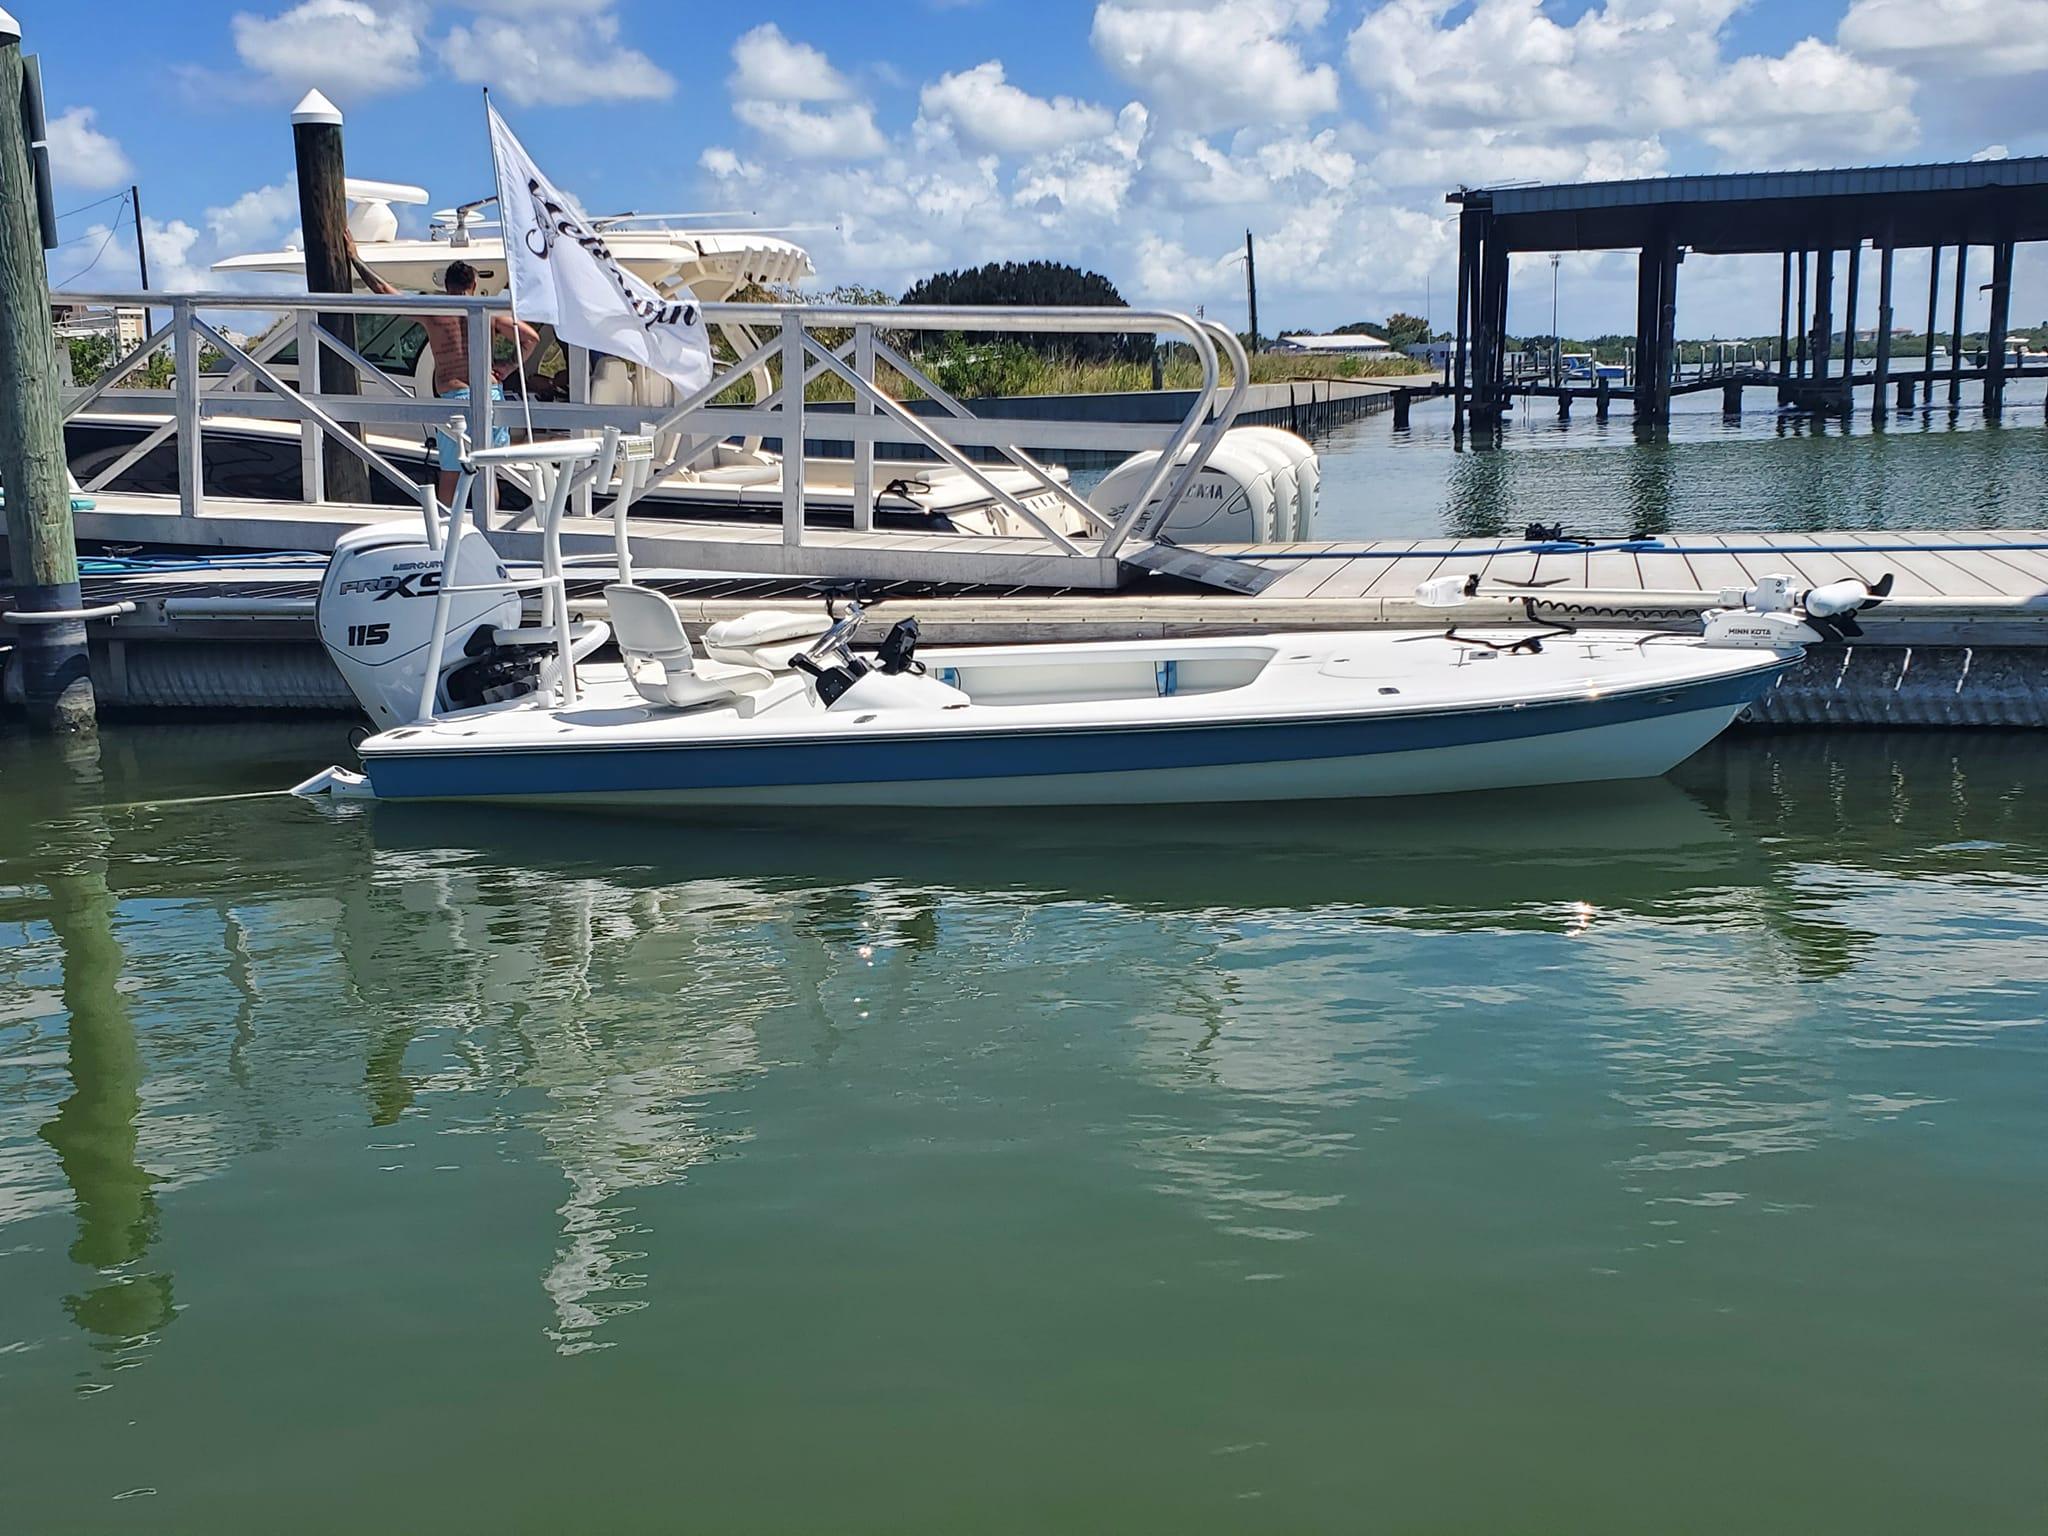 Flats boats for sale in Seminole - Boat Trader